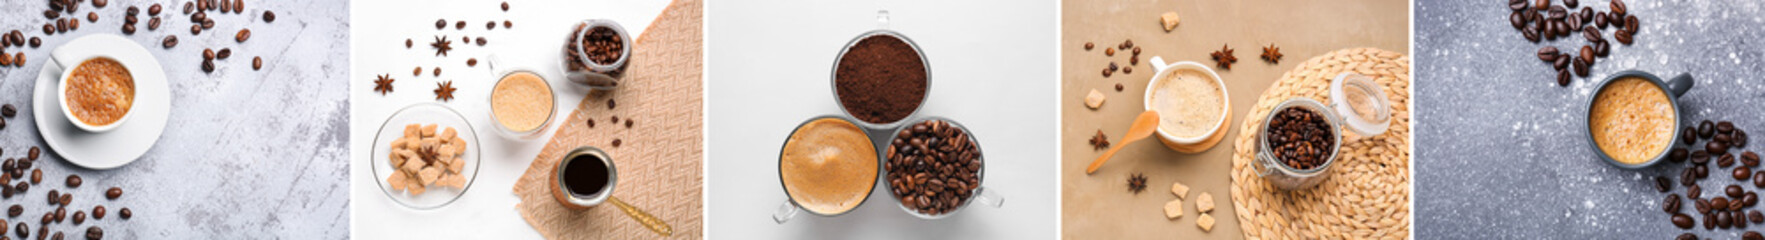 Collage of hot coffee and beans, top view